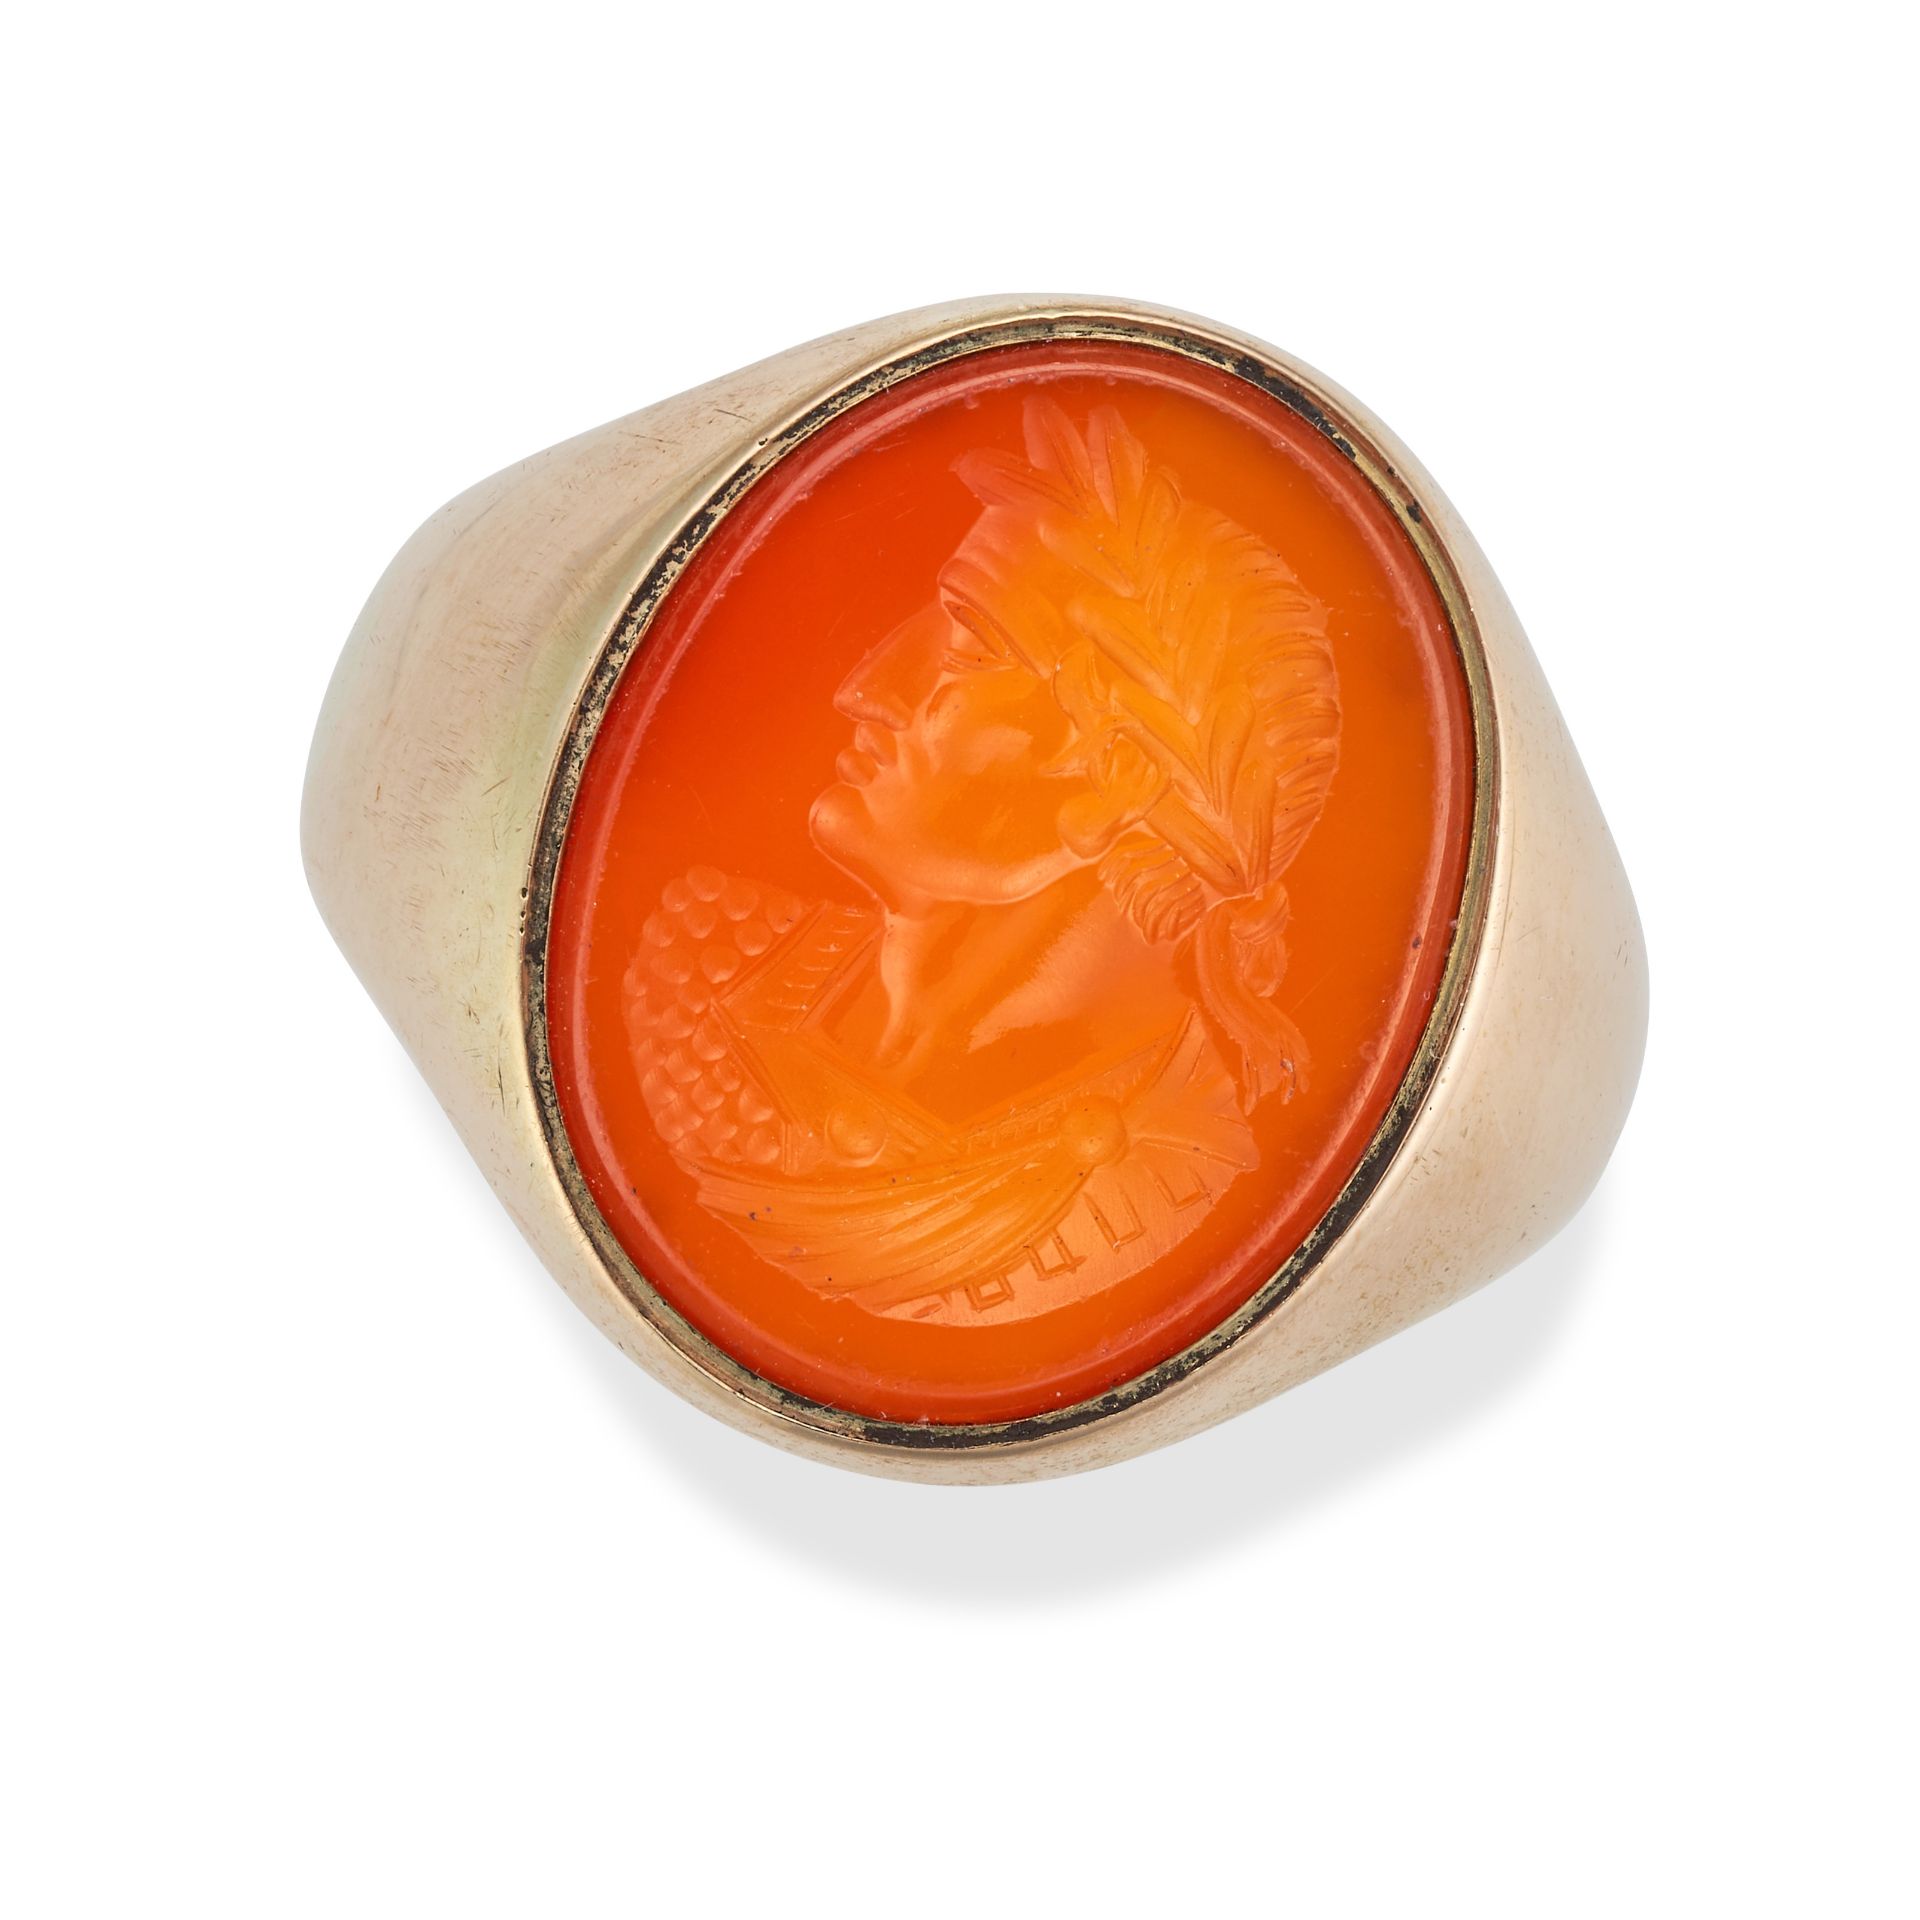 AN ANTIQUE CARNELIAN SIGNET RING in 15ct yellow gold, set with a carnelian intaglio carved to dep...